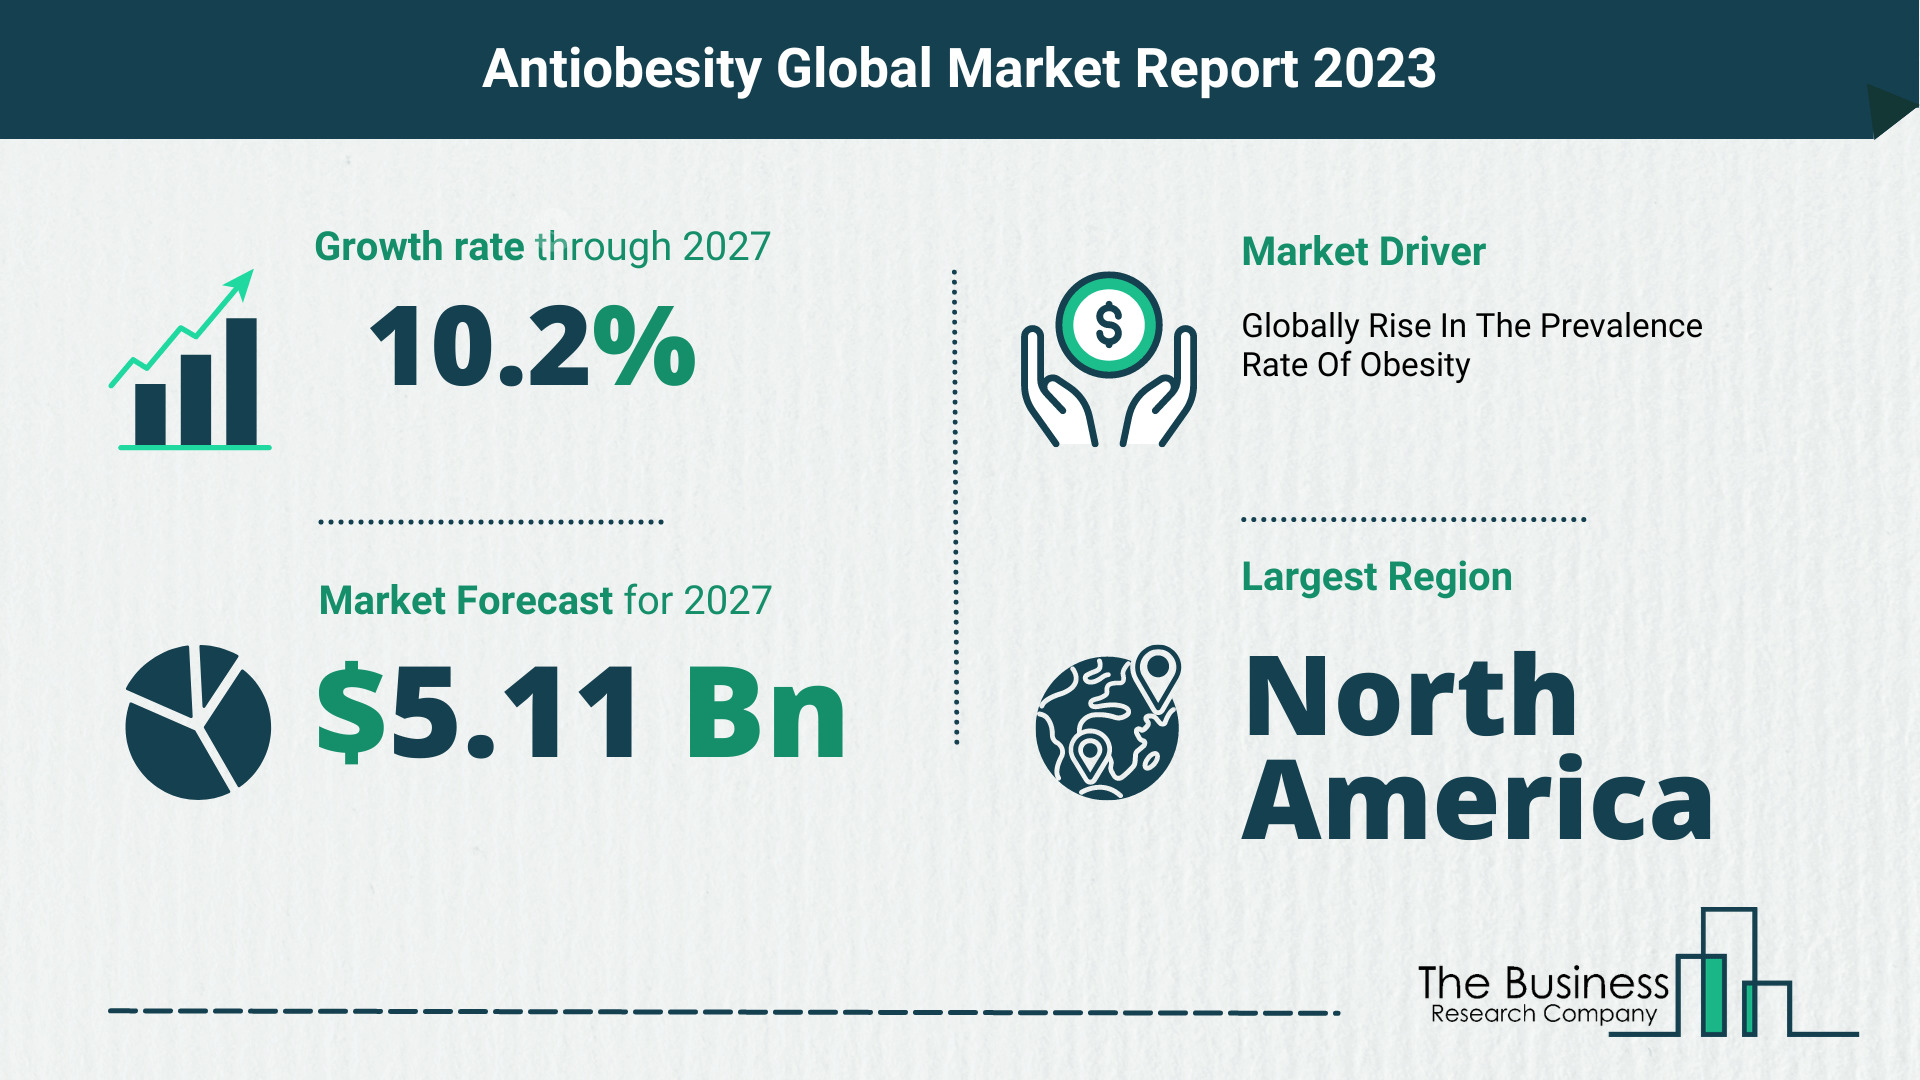 How Will The Antiobesity Market Globally Expand In 2023?